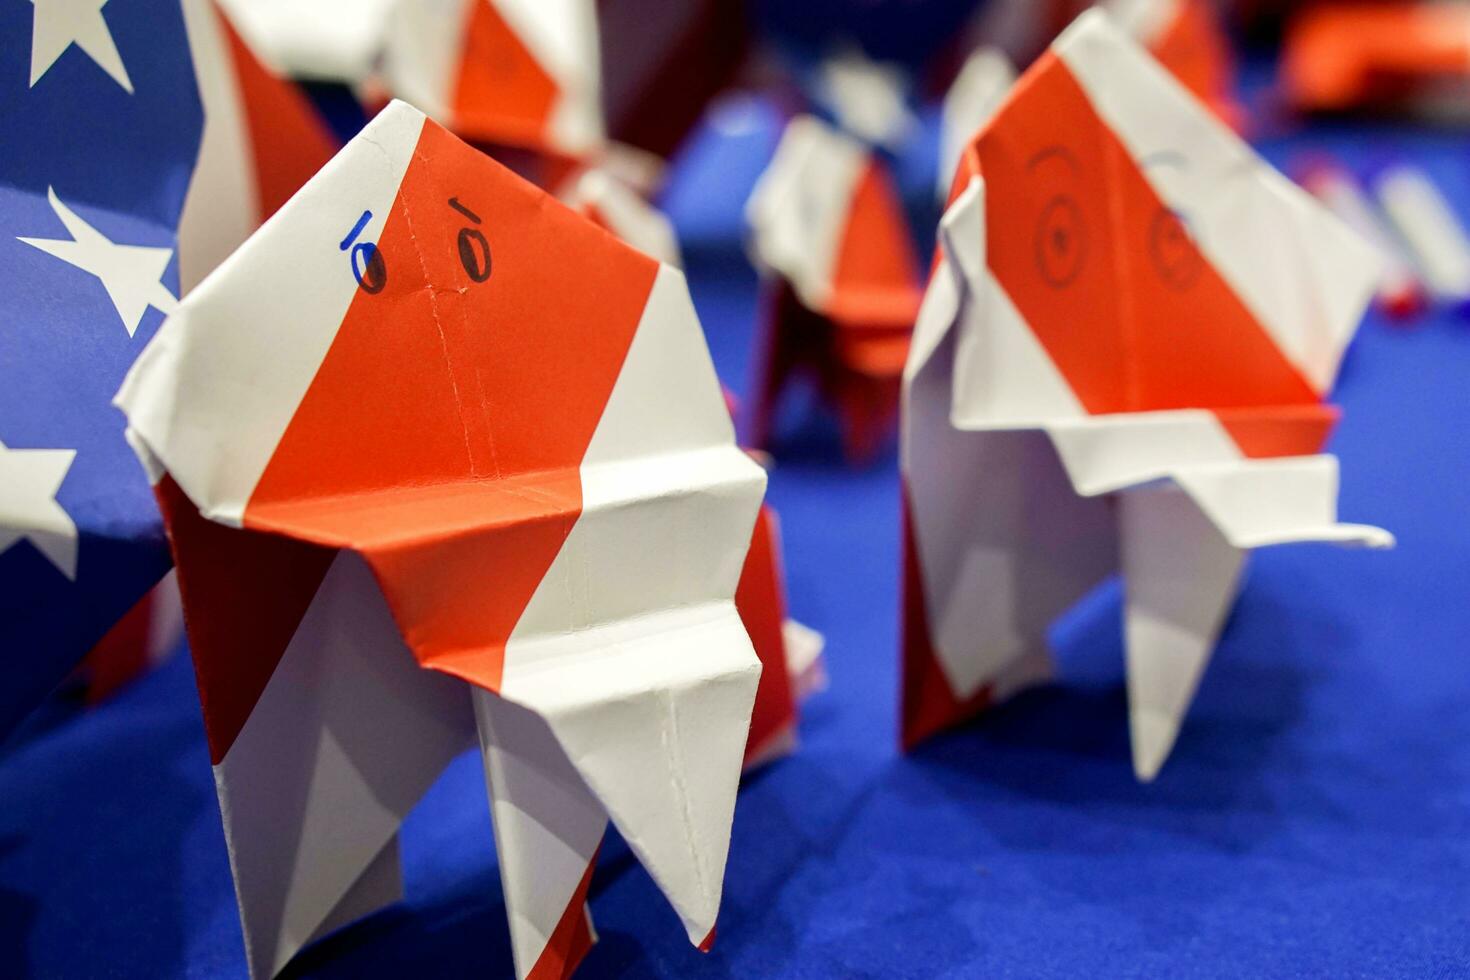 Thai elephant origami paper in The U.S.A flag pattern. Made by Exchange students from The U.S.A in Thailand. photo